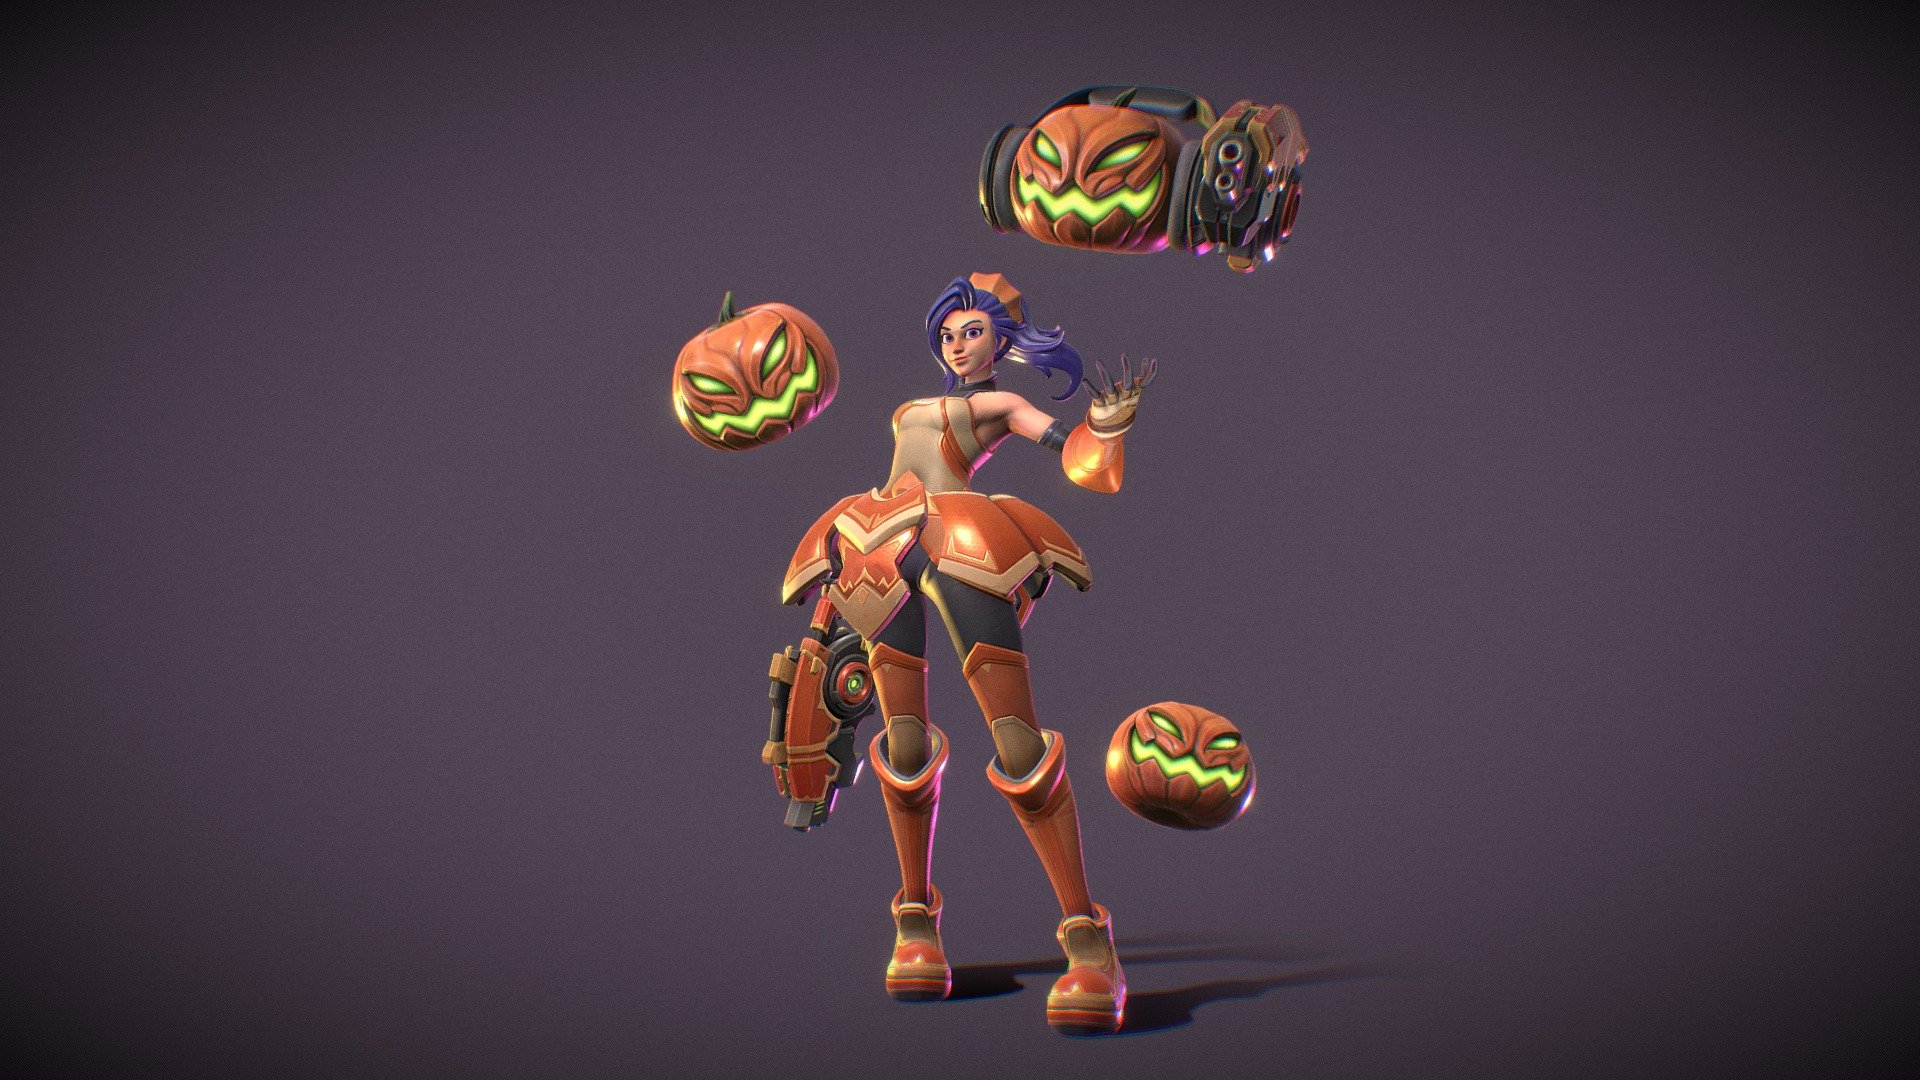 Introducing my latest artwork, which I like to call &ldquo;The Pumpkin Girl 3.0